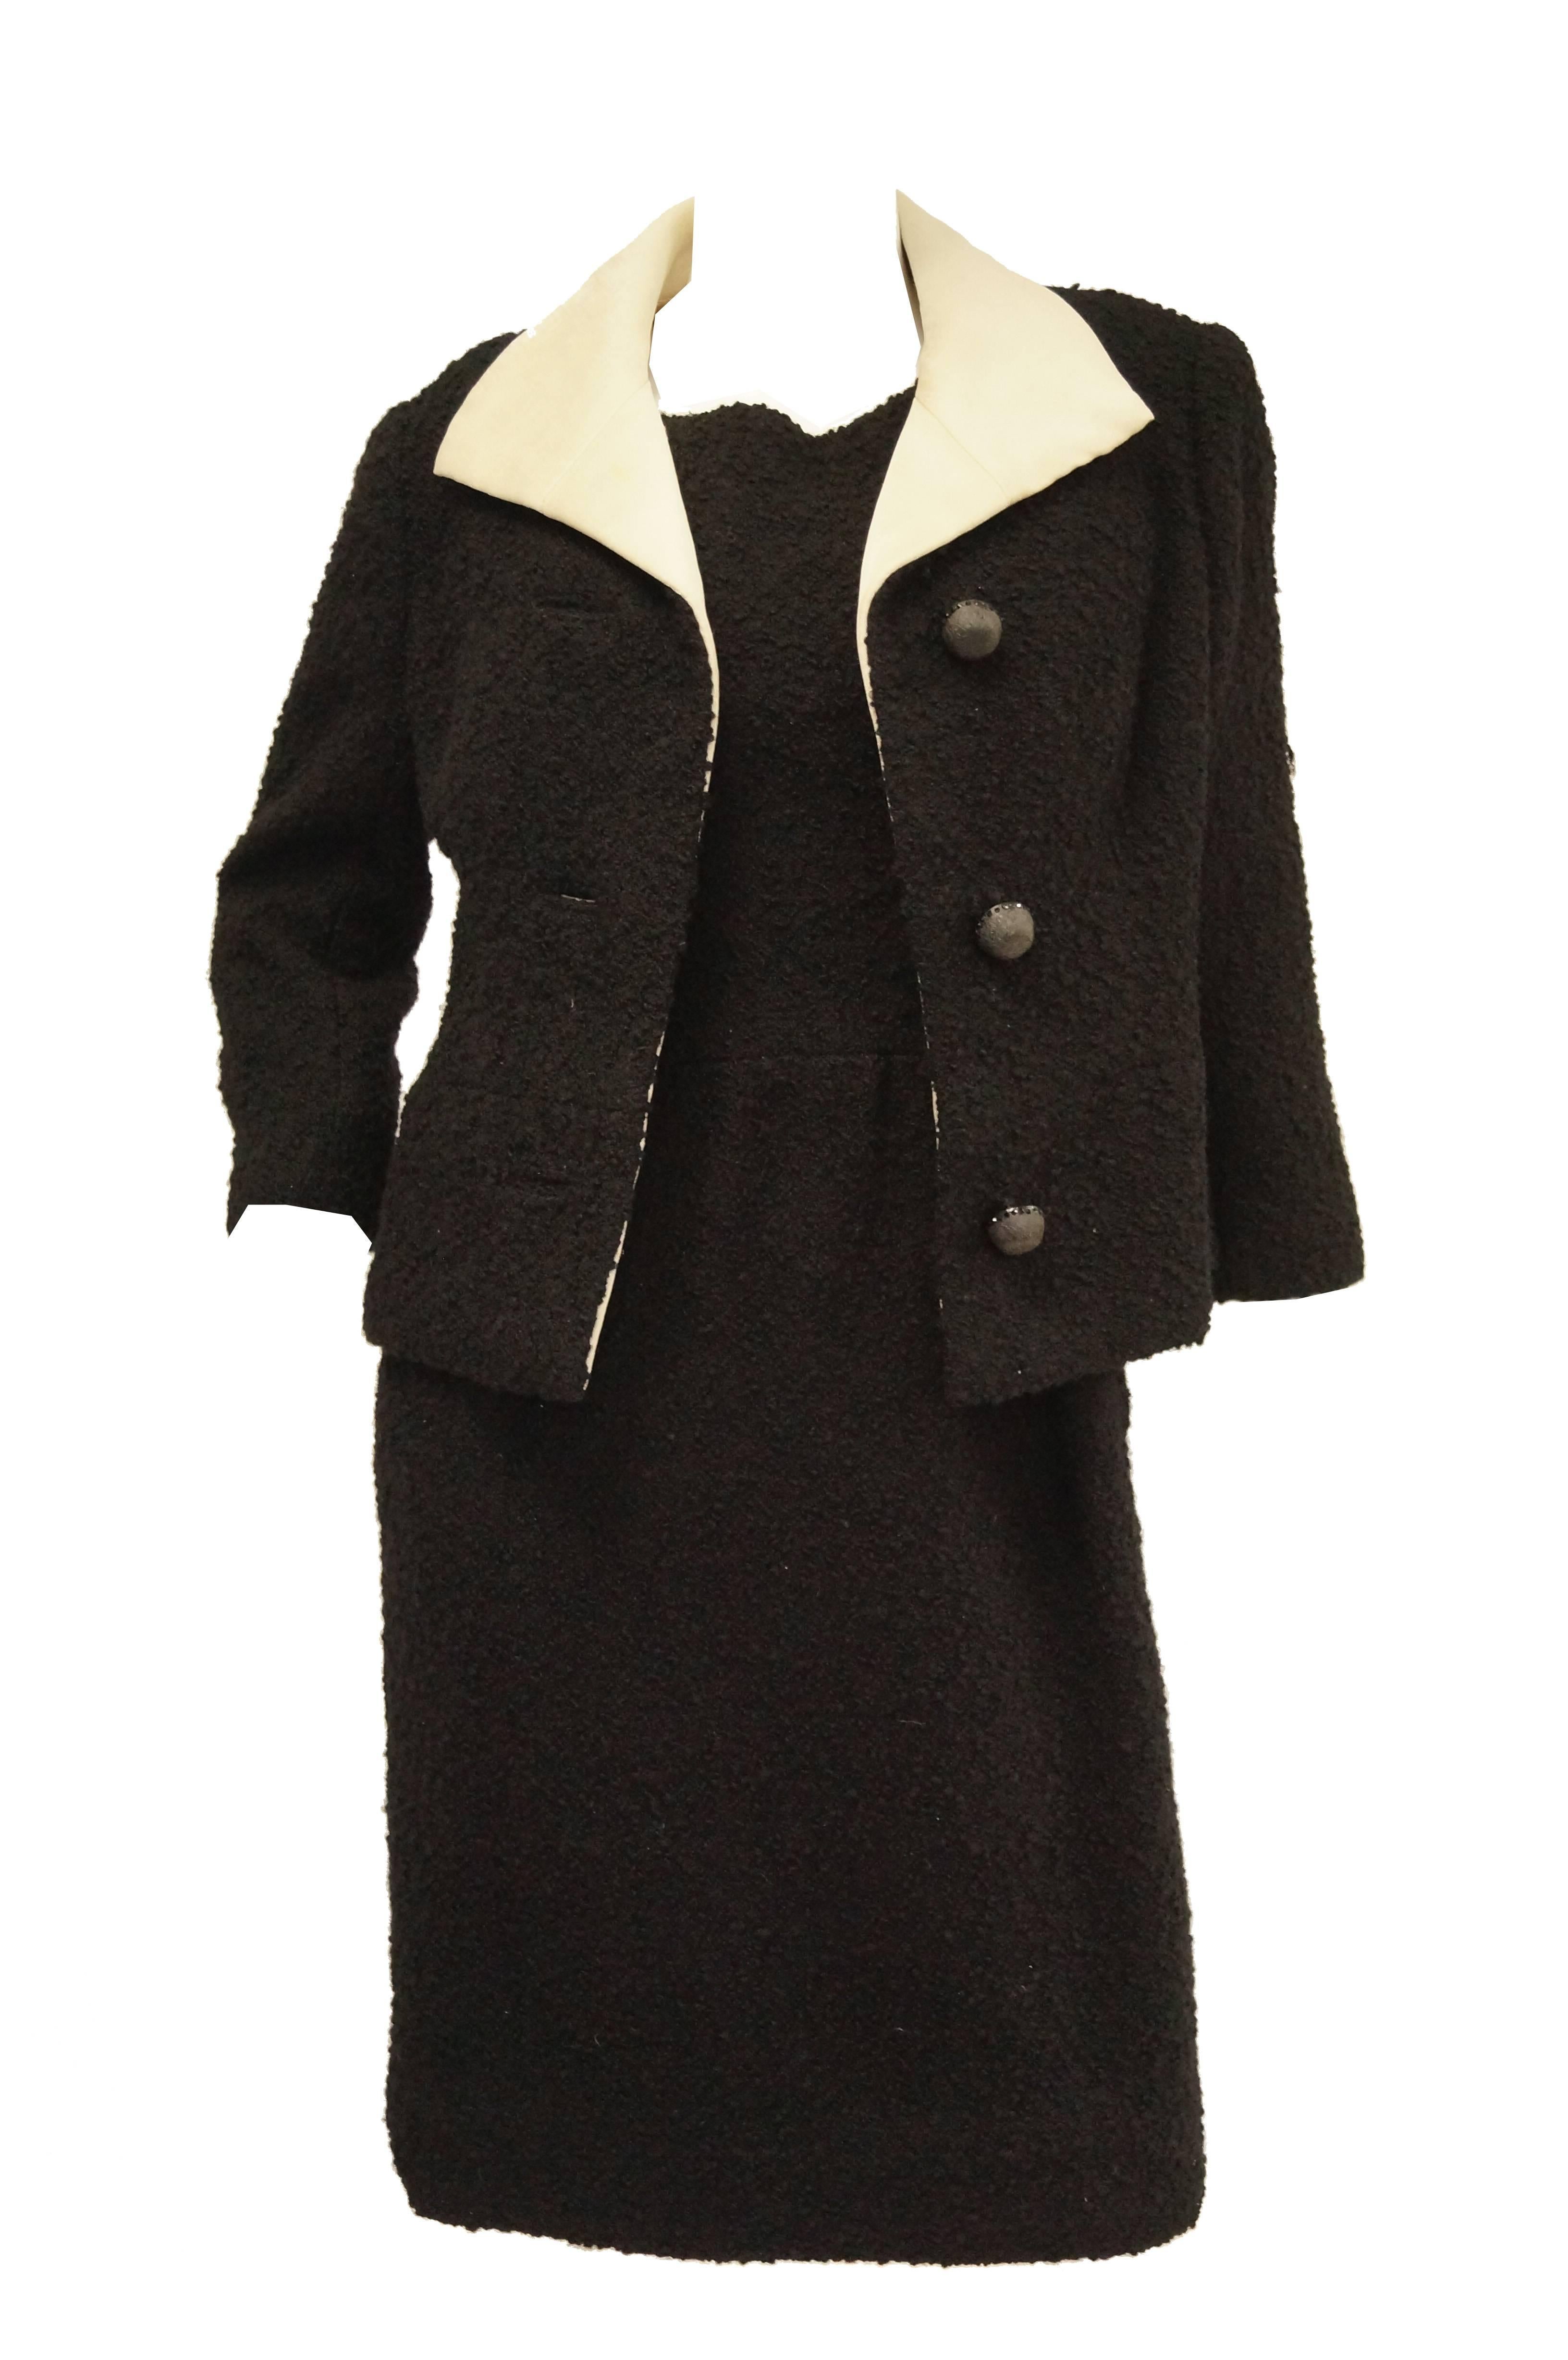 Early 1960s Givenchy Black Wool Boucle Sheath Dress and Silk Lined Jacket 4